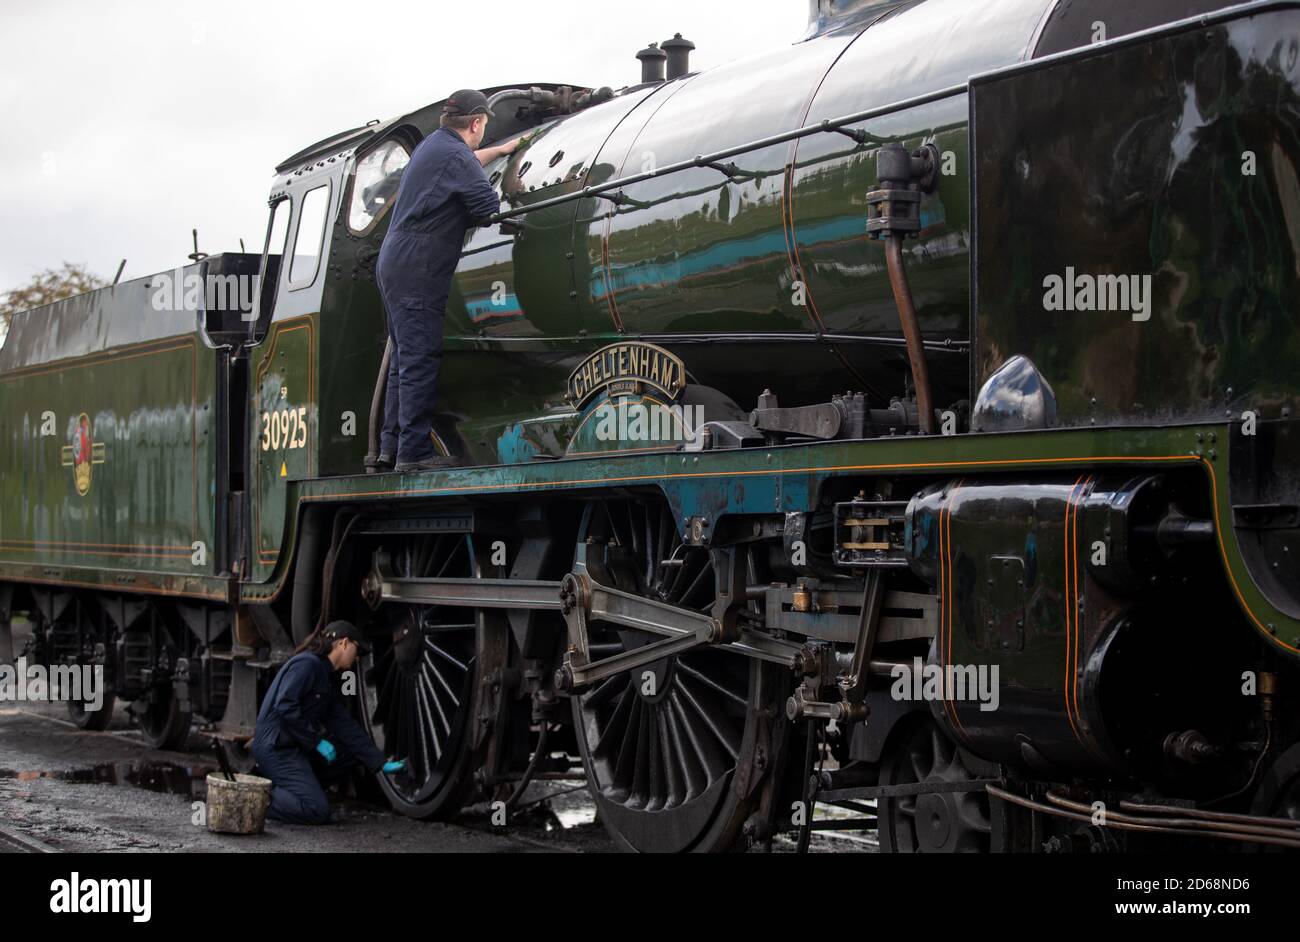 Volunteers clean the SR V Schools class steam locomotive 'Cheltenham' at Ropley station ahead of this weekend's Autumn Steam Gala on the Mid Hants Railway's Watercress Line. Stock Photo